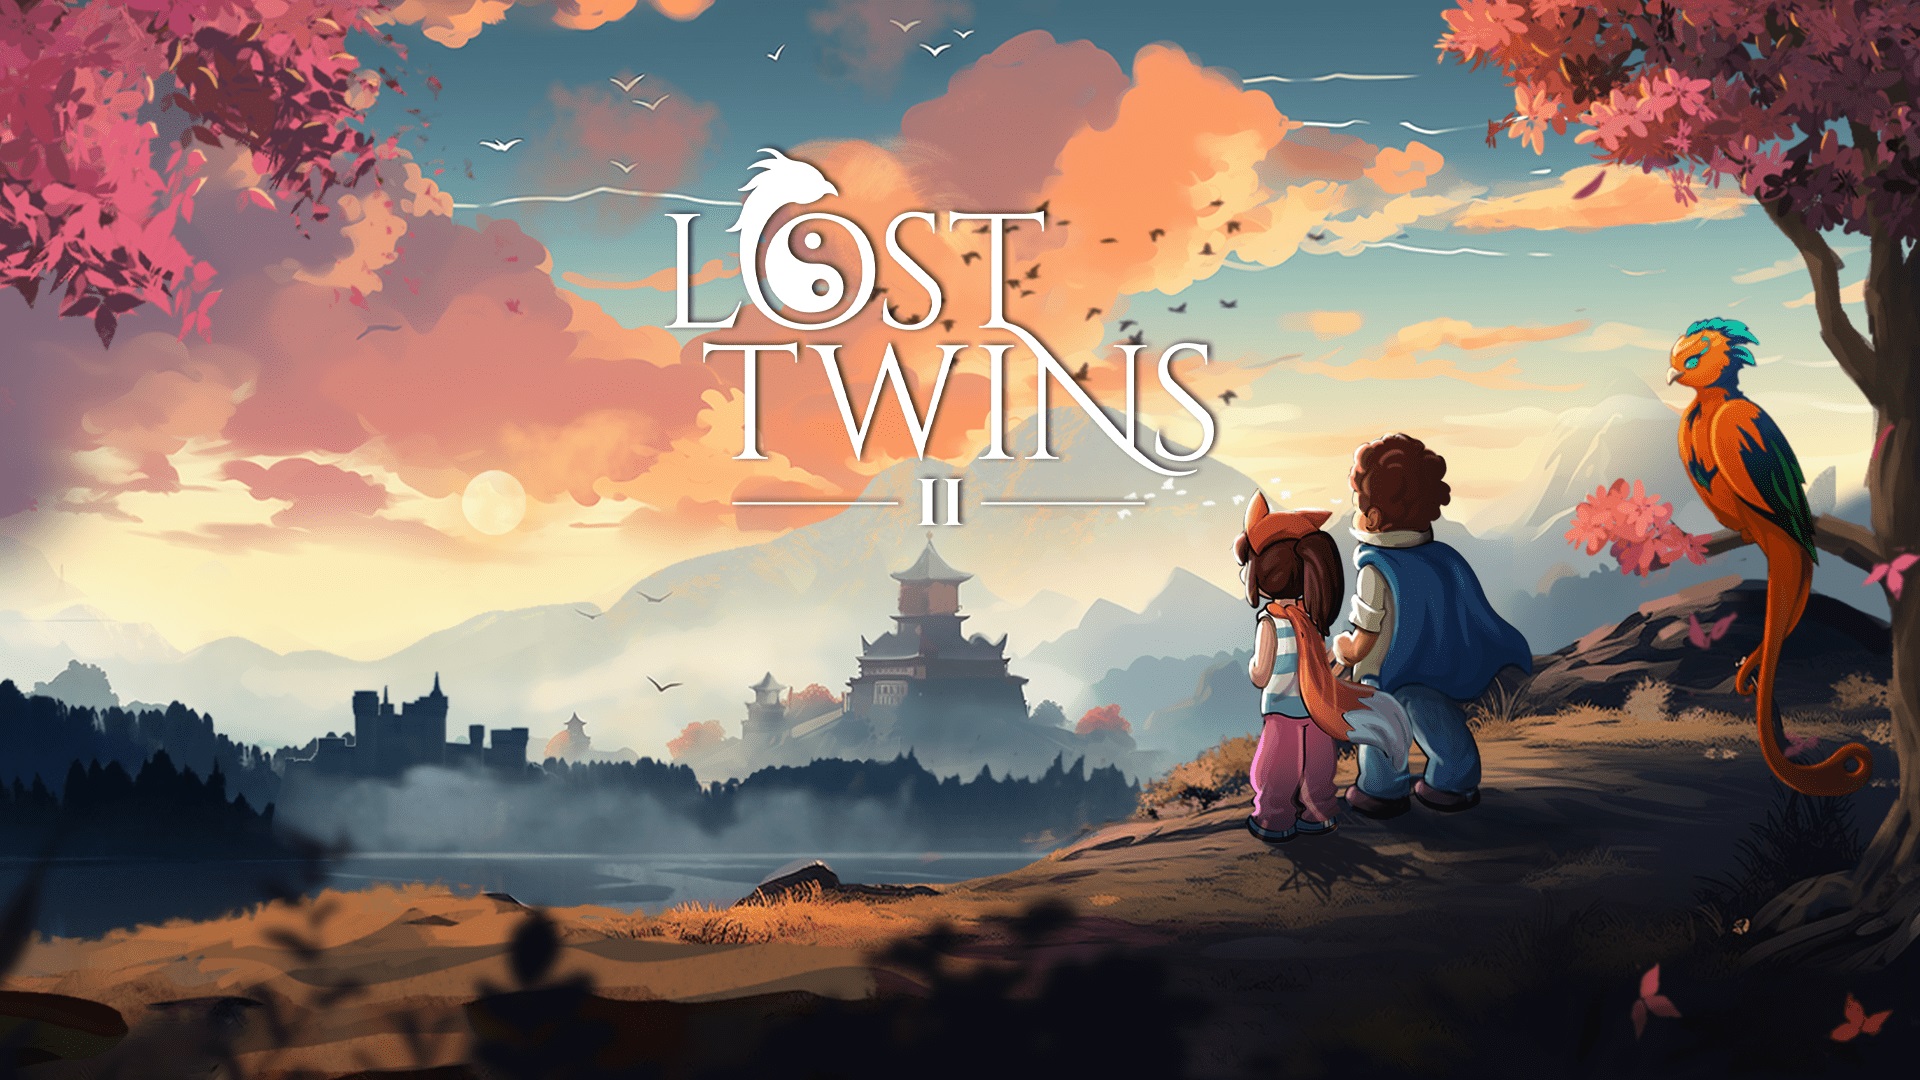 Wishlist Playdew’s Lost Twins II, Coming this Year